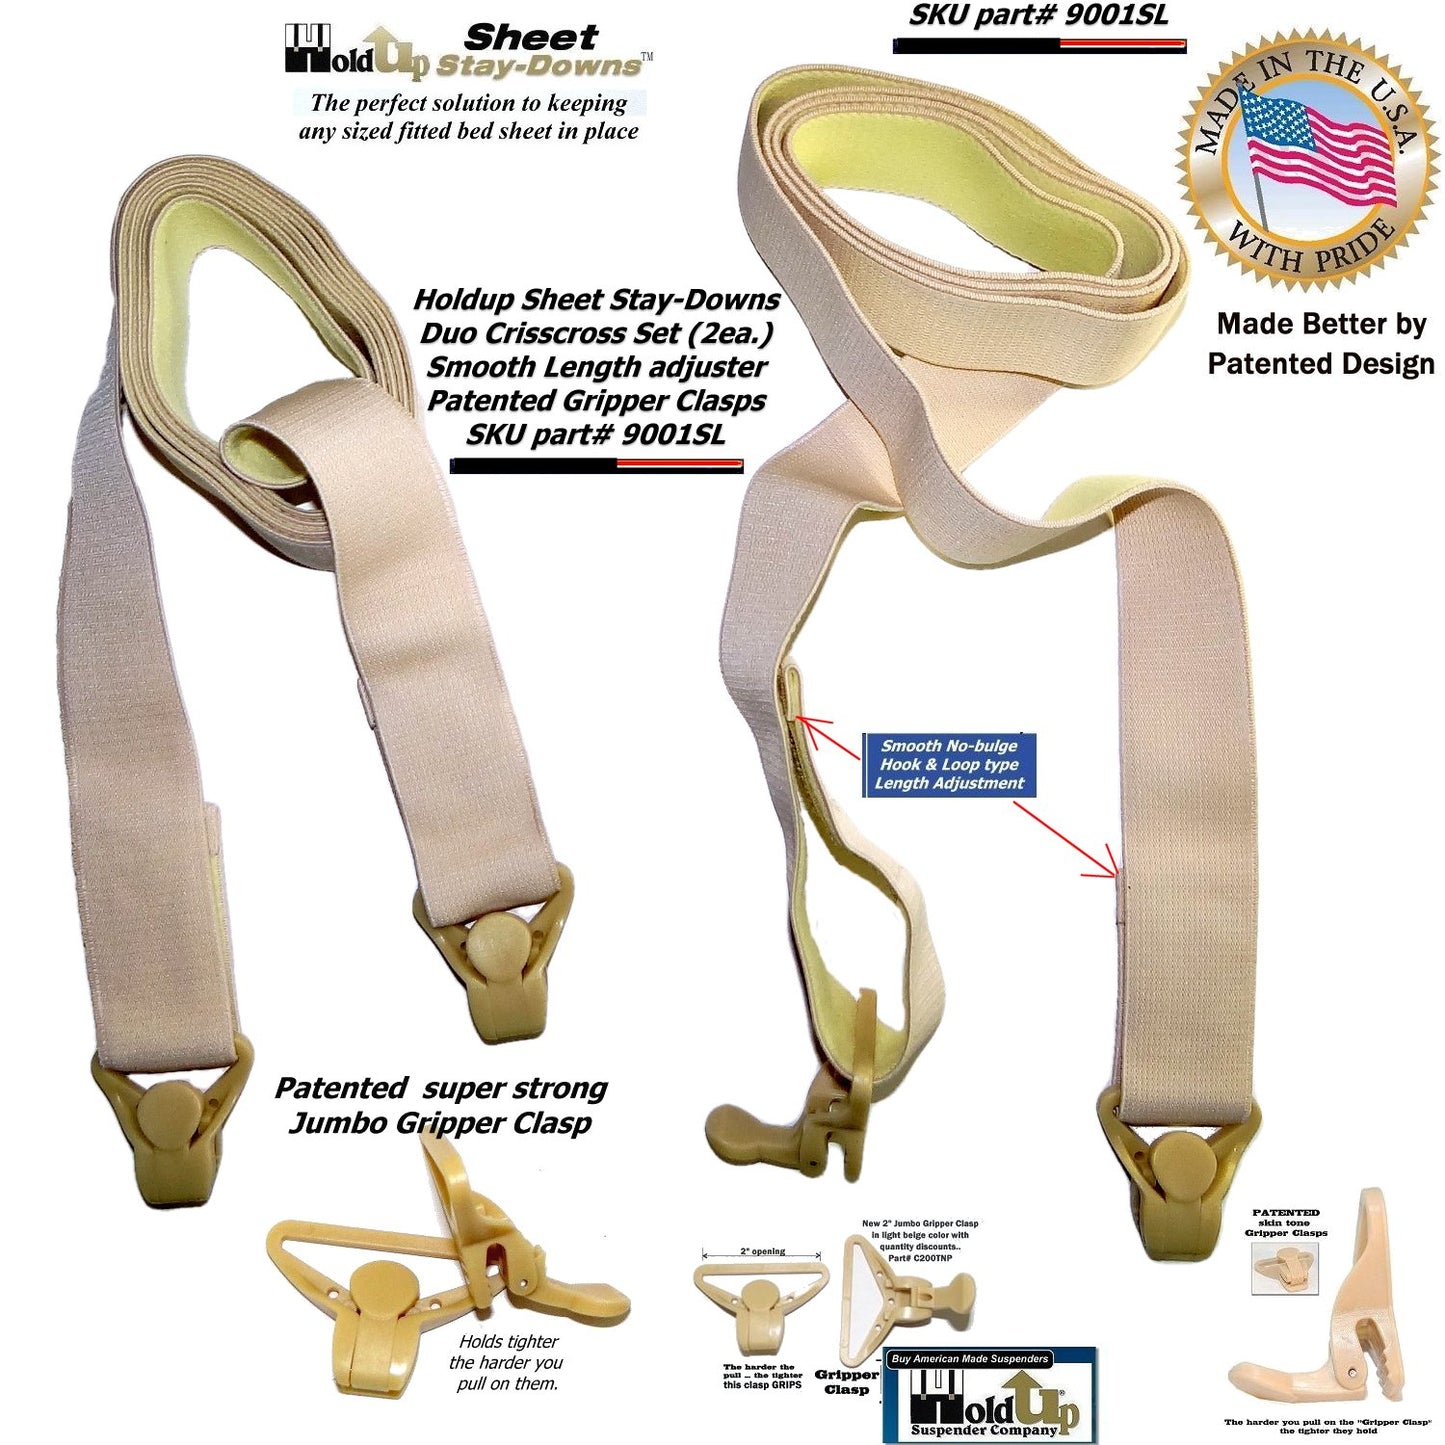 Hold-Up Crisscross long Fitted Sheet Strap called Stay-downs with US Patented Gripper Clasps